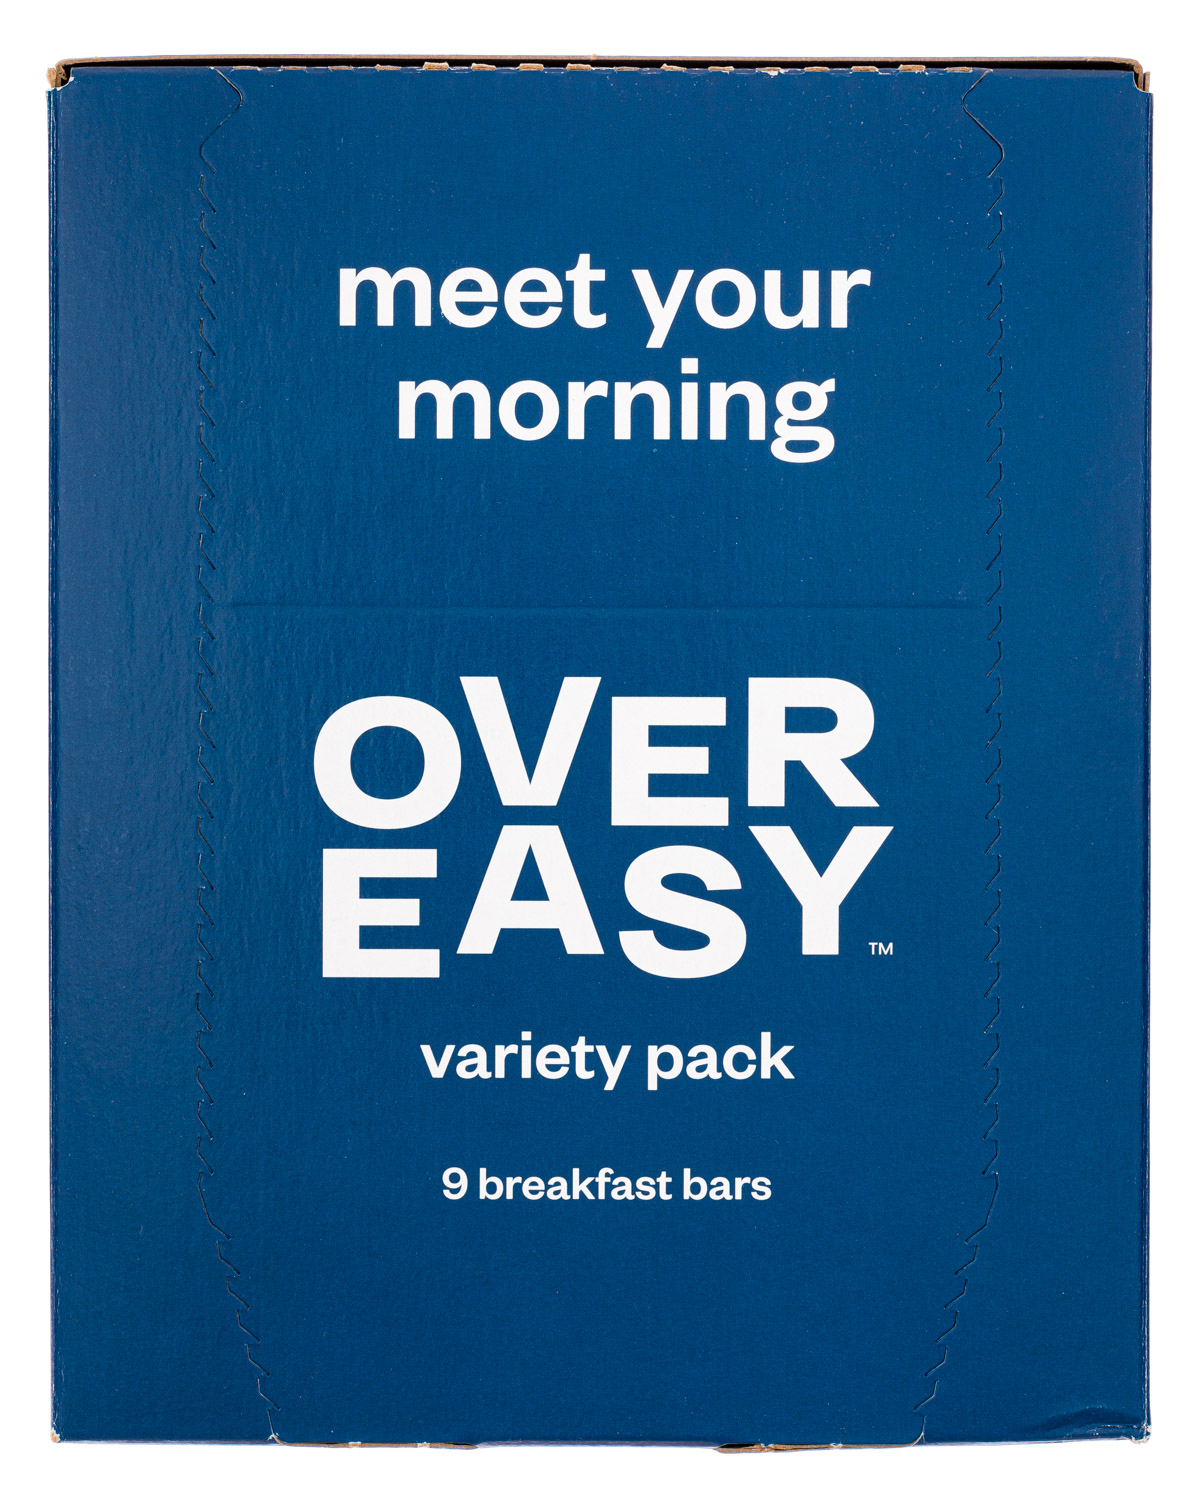 Variety Pack: "Meet Your Morning"